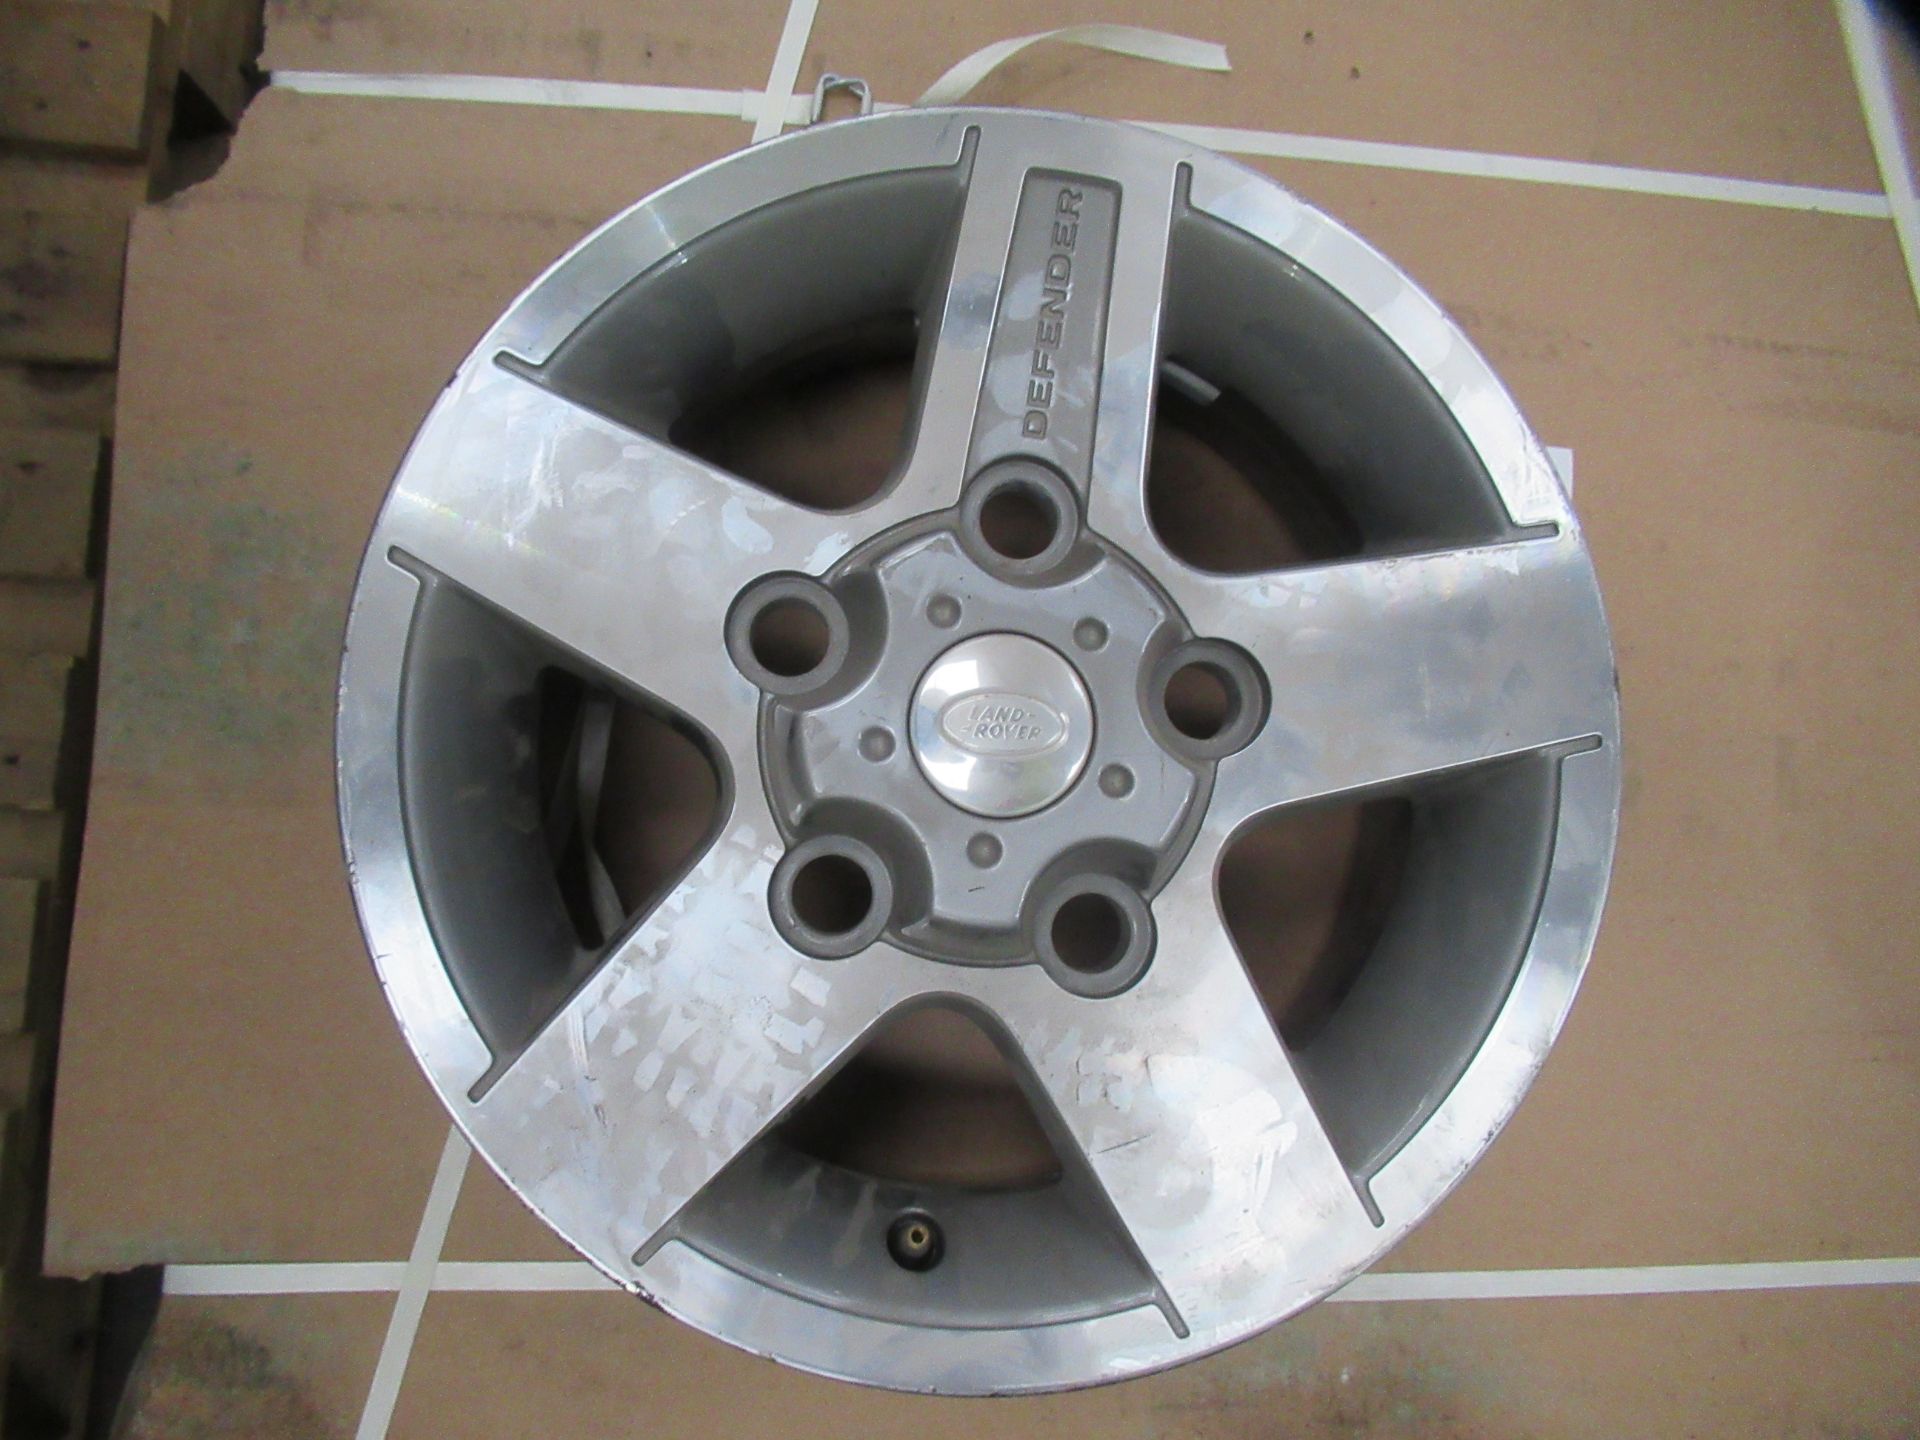 5x 16" 2015 Landrover Defender Diamond Cut Wheels with Bolts & Locking Nut - Image 2 of 3